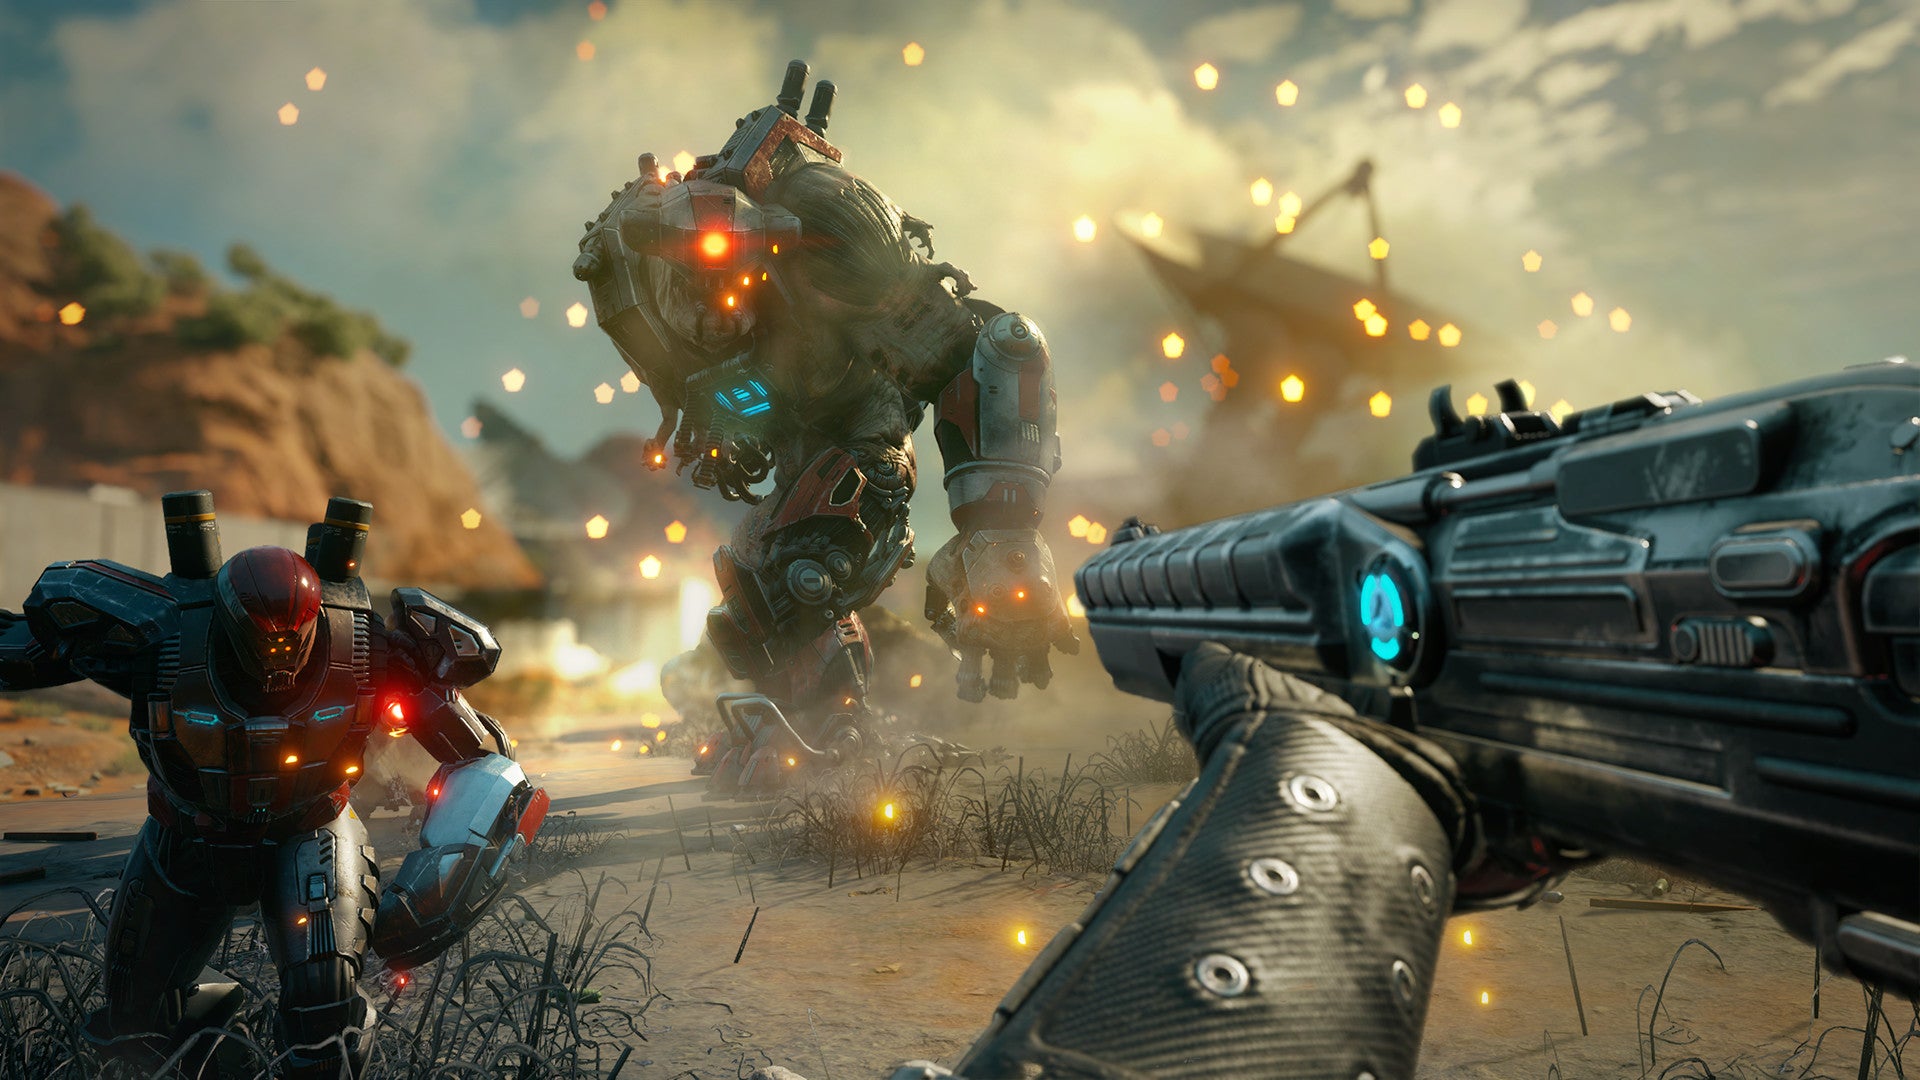 Image for You can save £10 off Rage 2 on PS4 and Xbox One